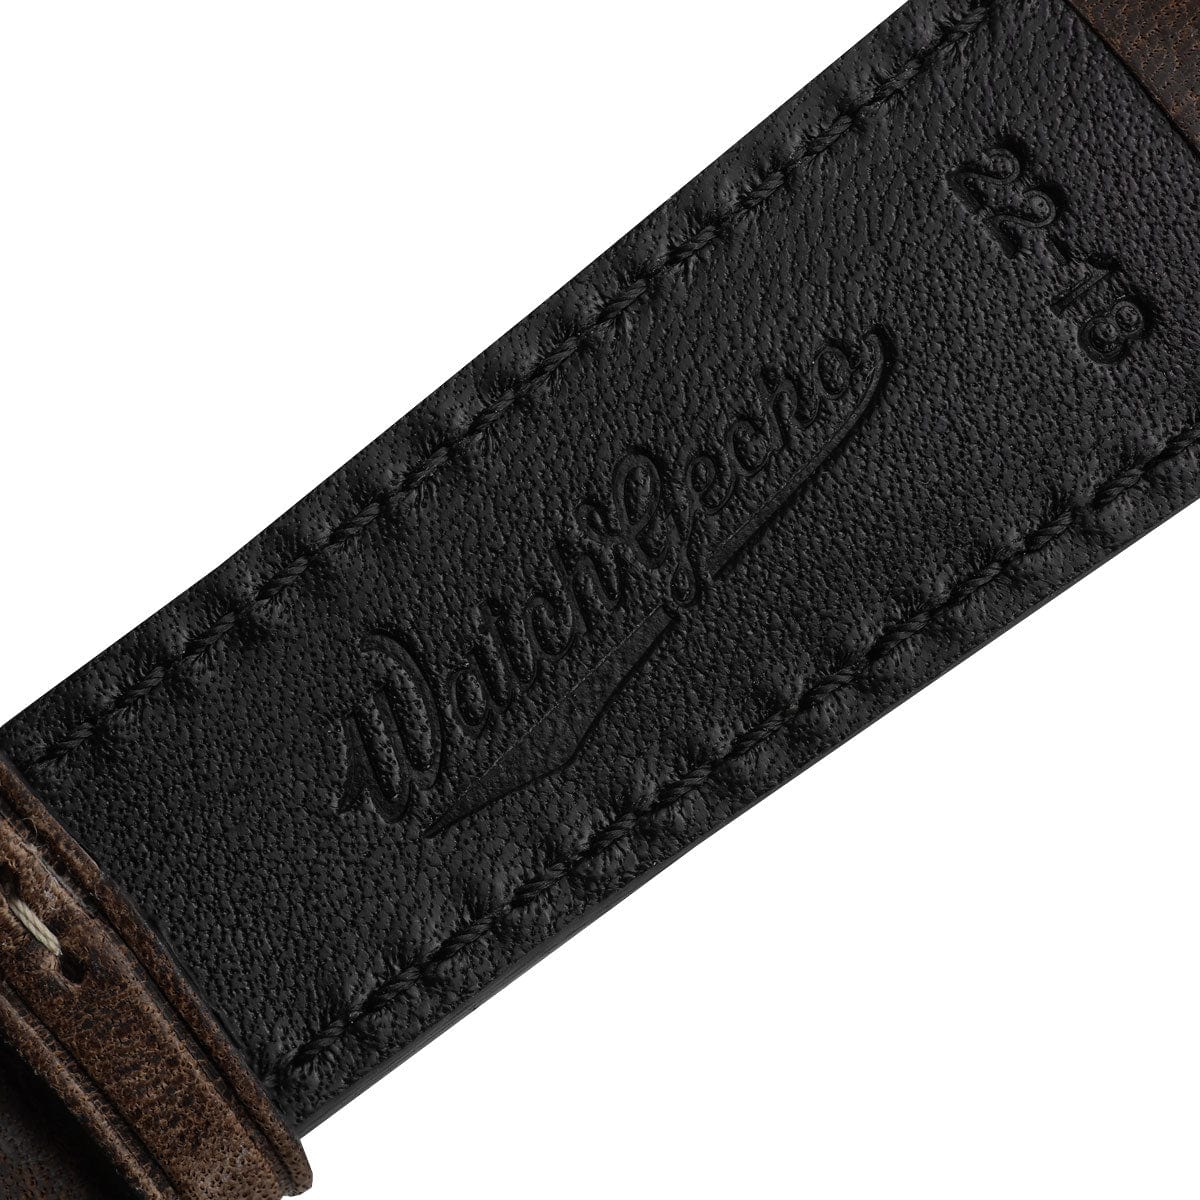 Vintage Highley Genuine Leather Watch Strap